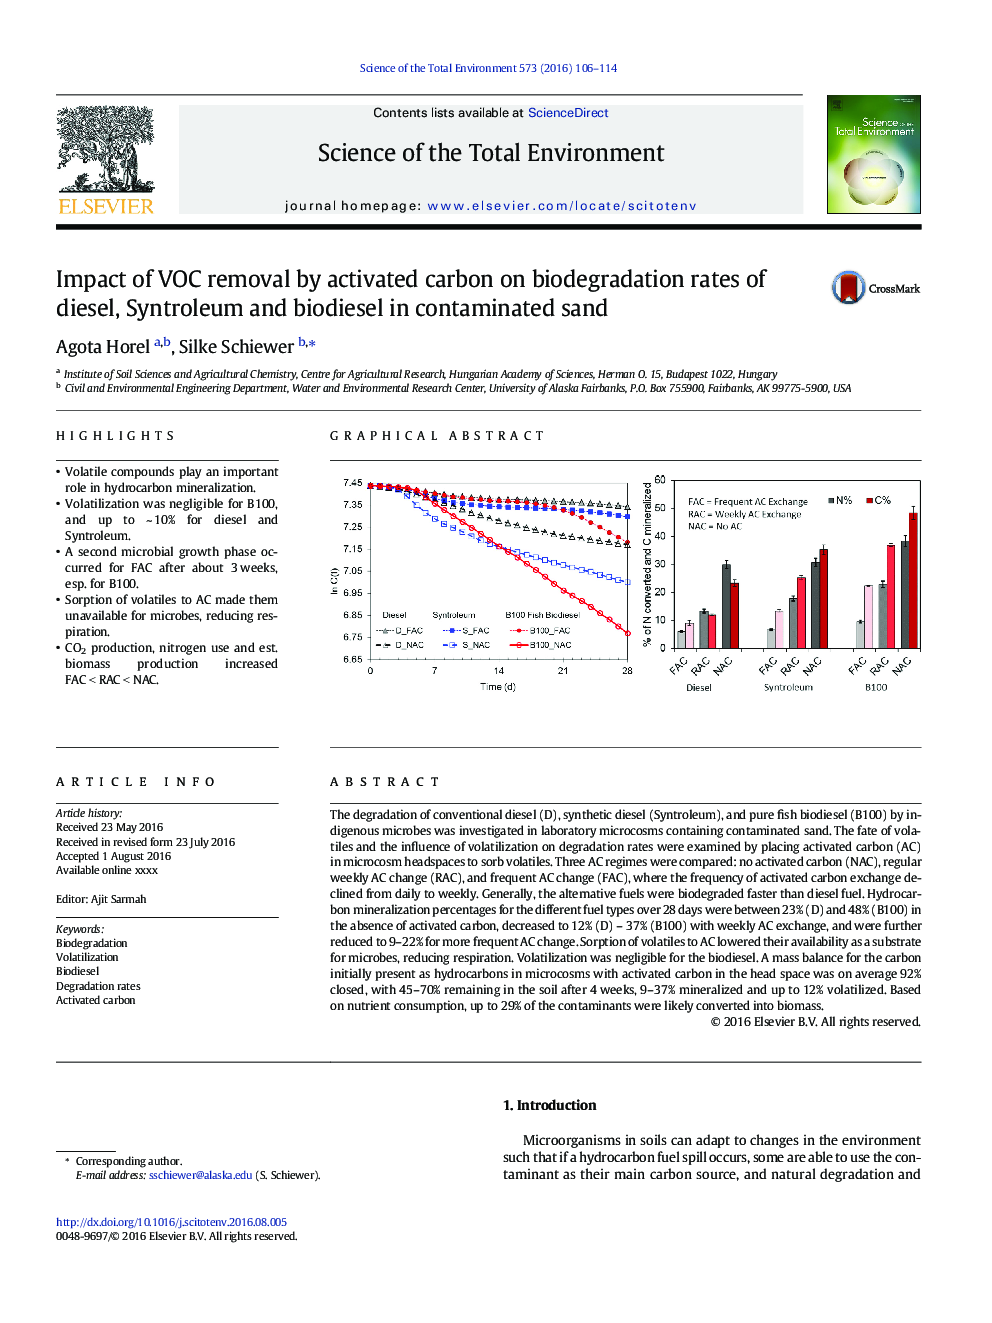 Impact of VOC removal by activated carbon on biodegradation rates of diesel, Syntroleum and biodiesel in contaminated sand